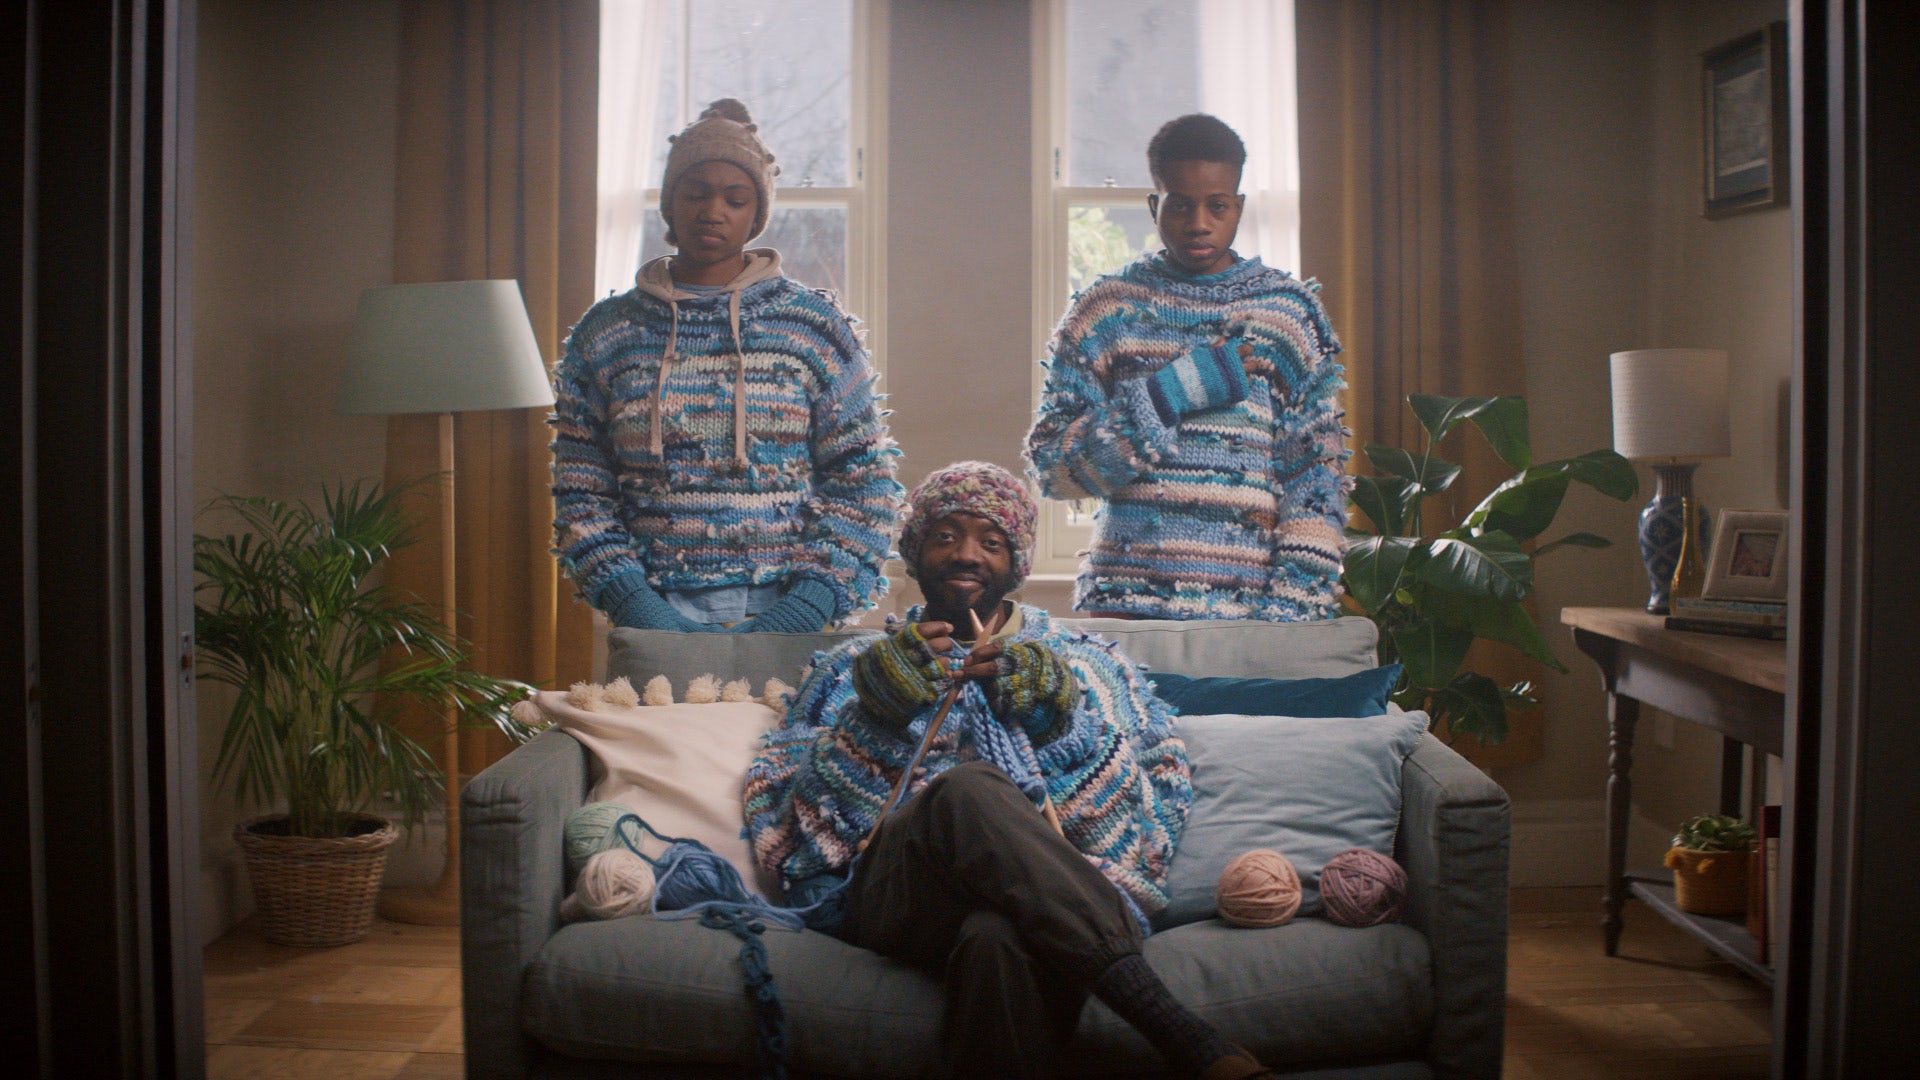 Image of a person sat on a sofa knitting with two people young people stood behind wearing matching knitted patterned jumpers